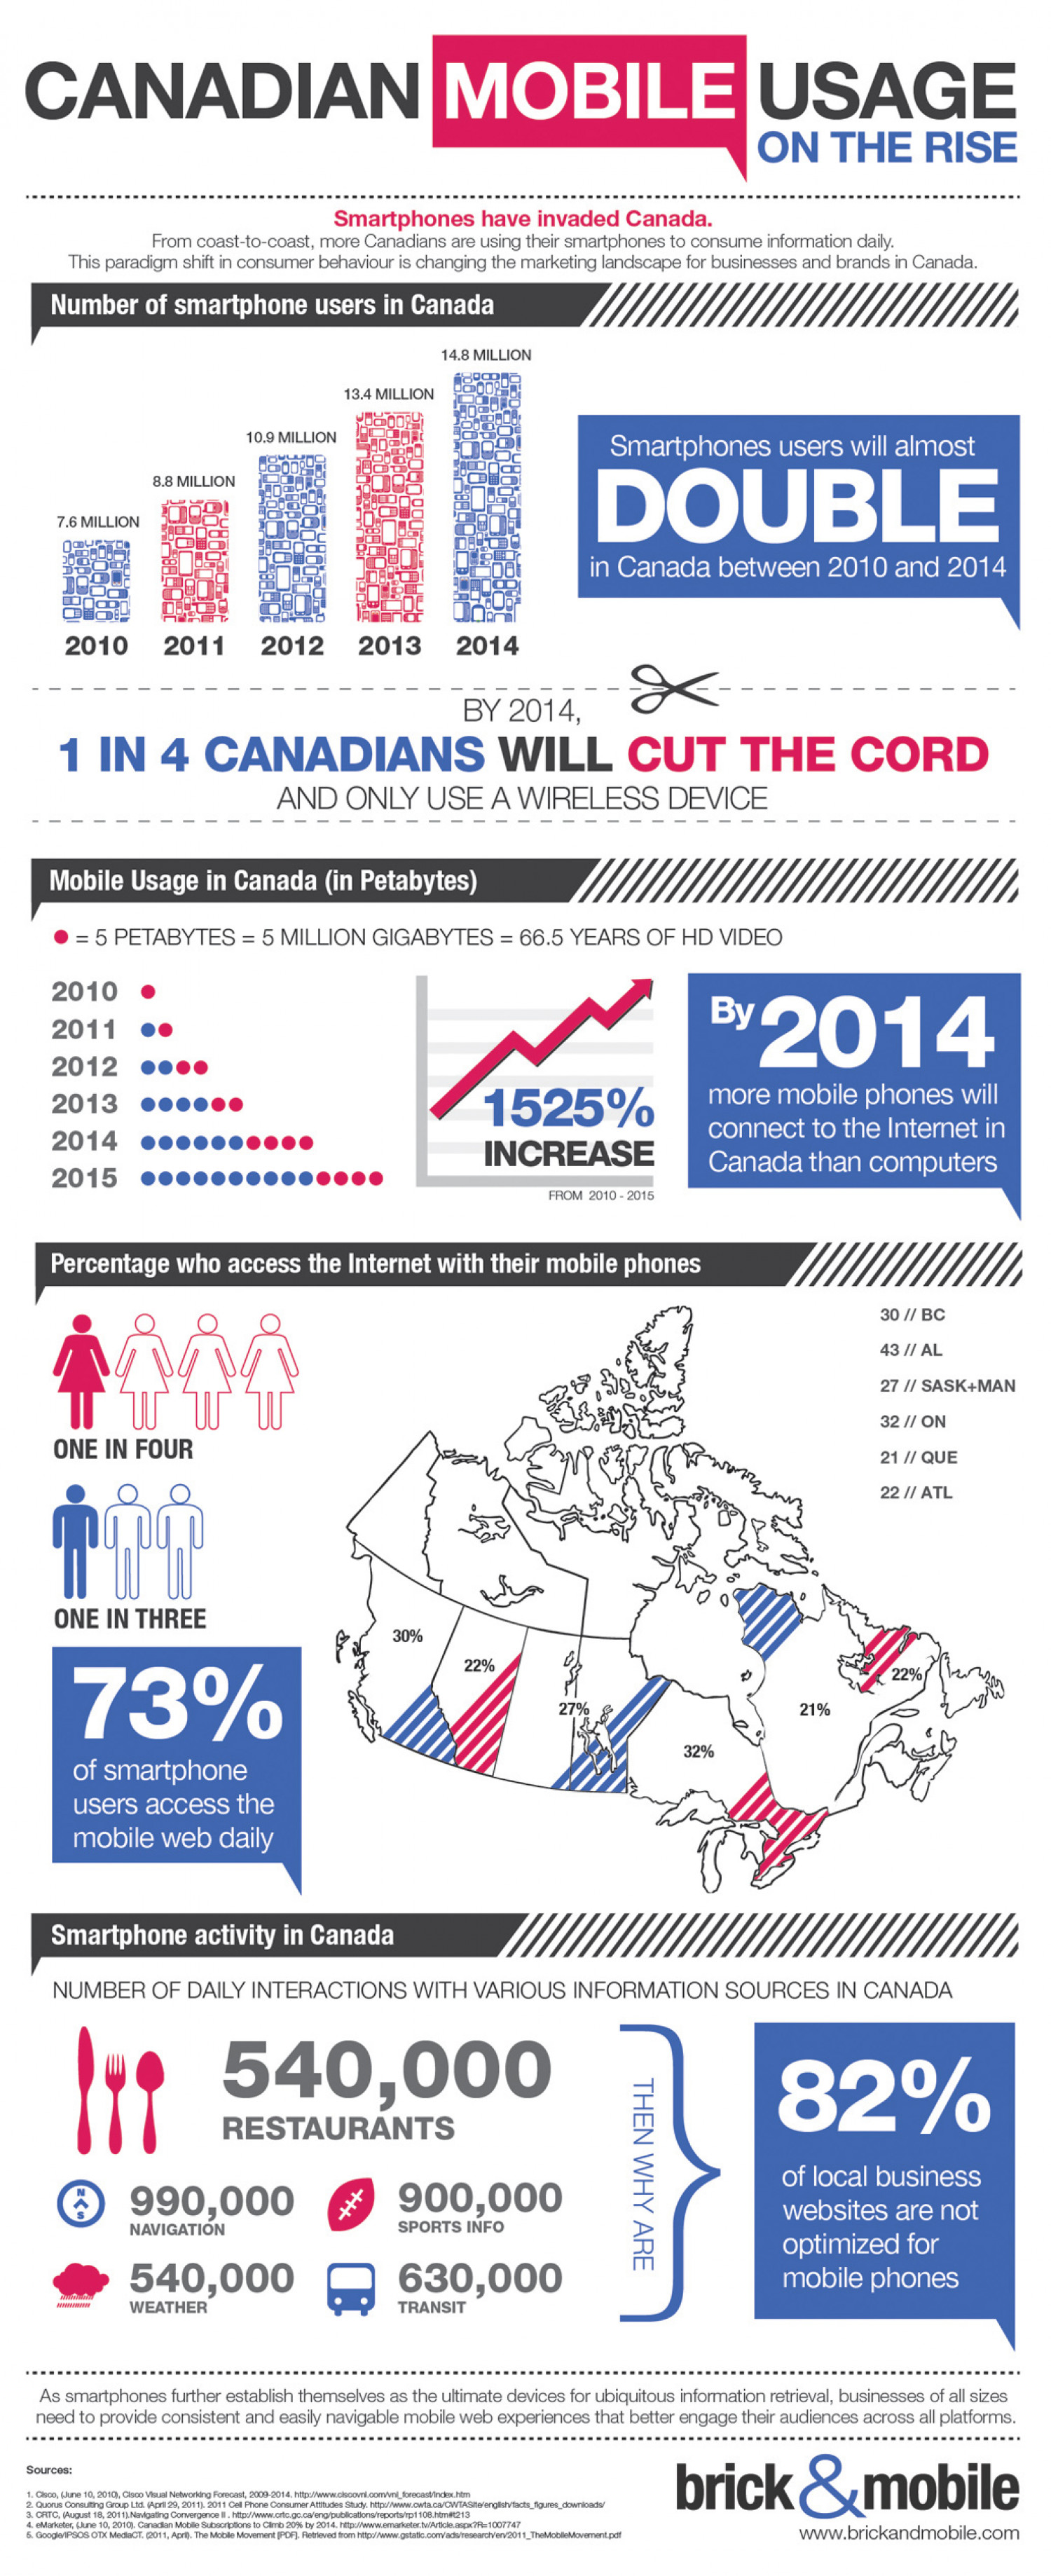 Canadian Mobile Usage on the Rise Infographic